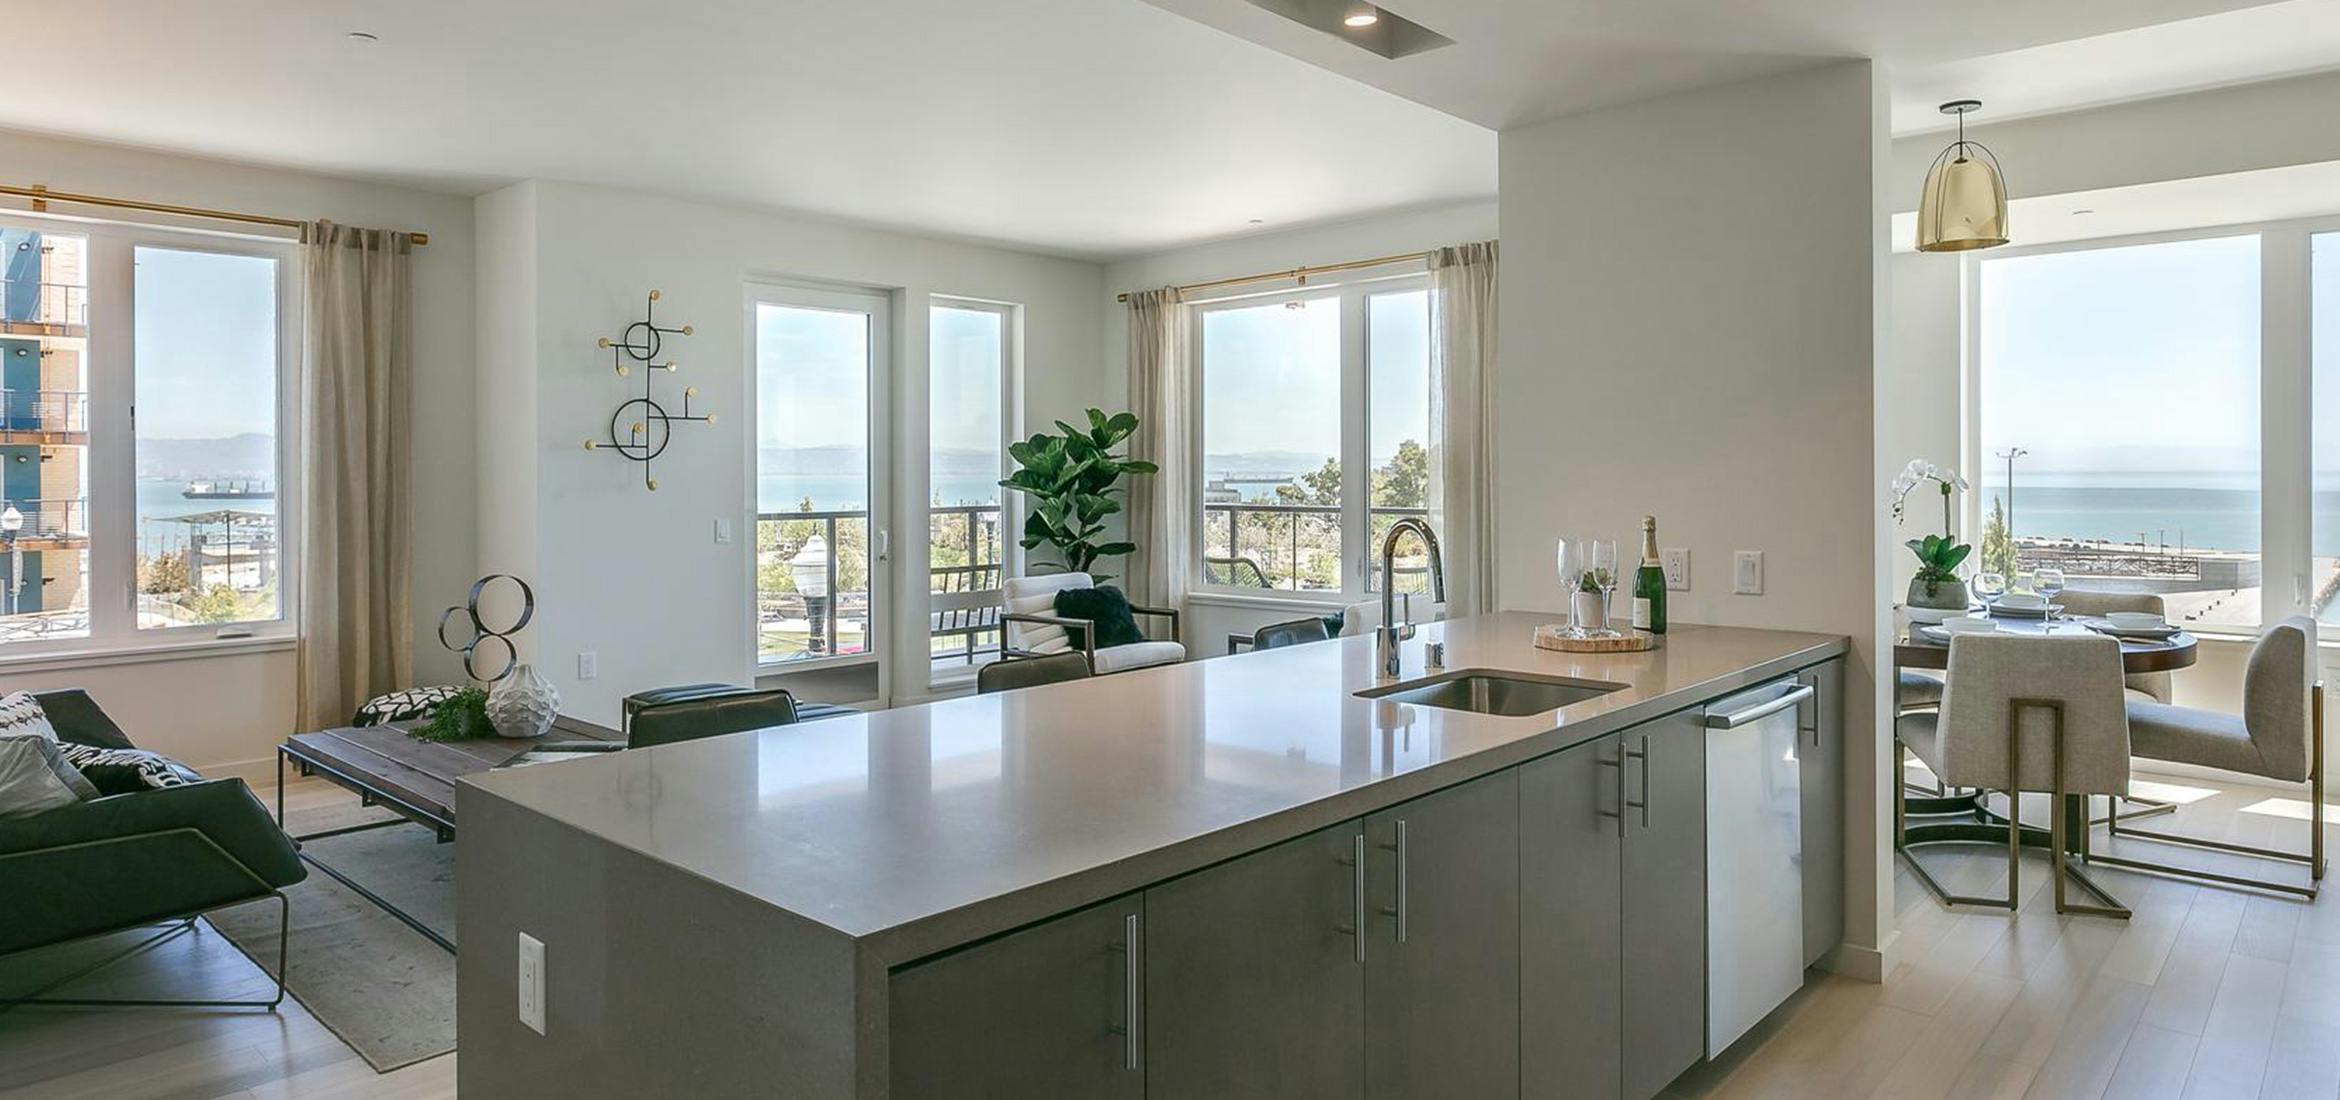 The Monarch condos are fitted with large windows that allow for unobstructed Bay views and natural lighting, as well as hardwood flooring throughout the kitchen and living area. 